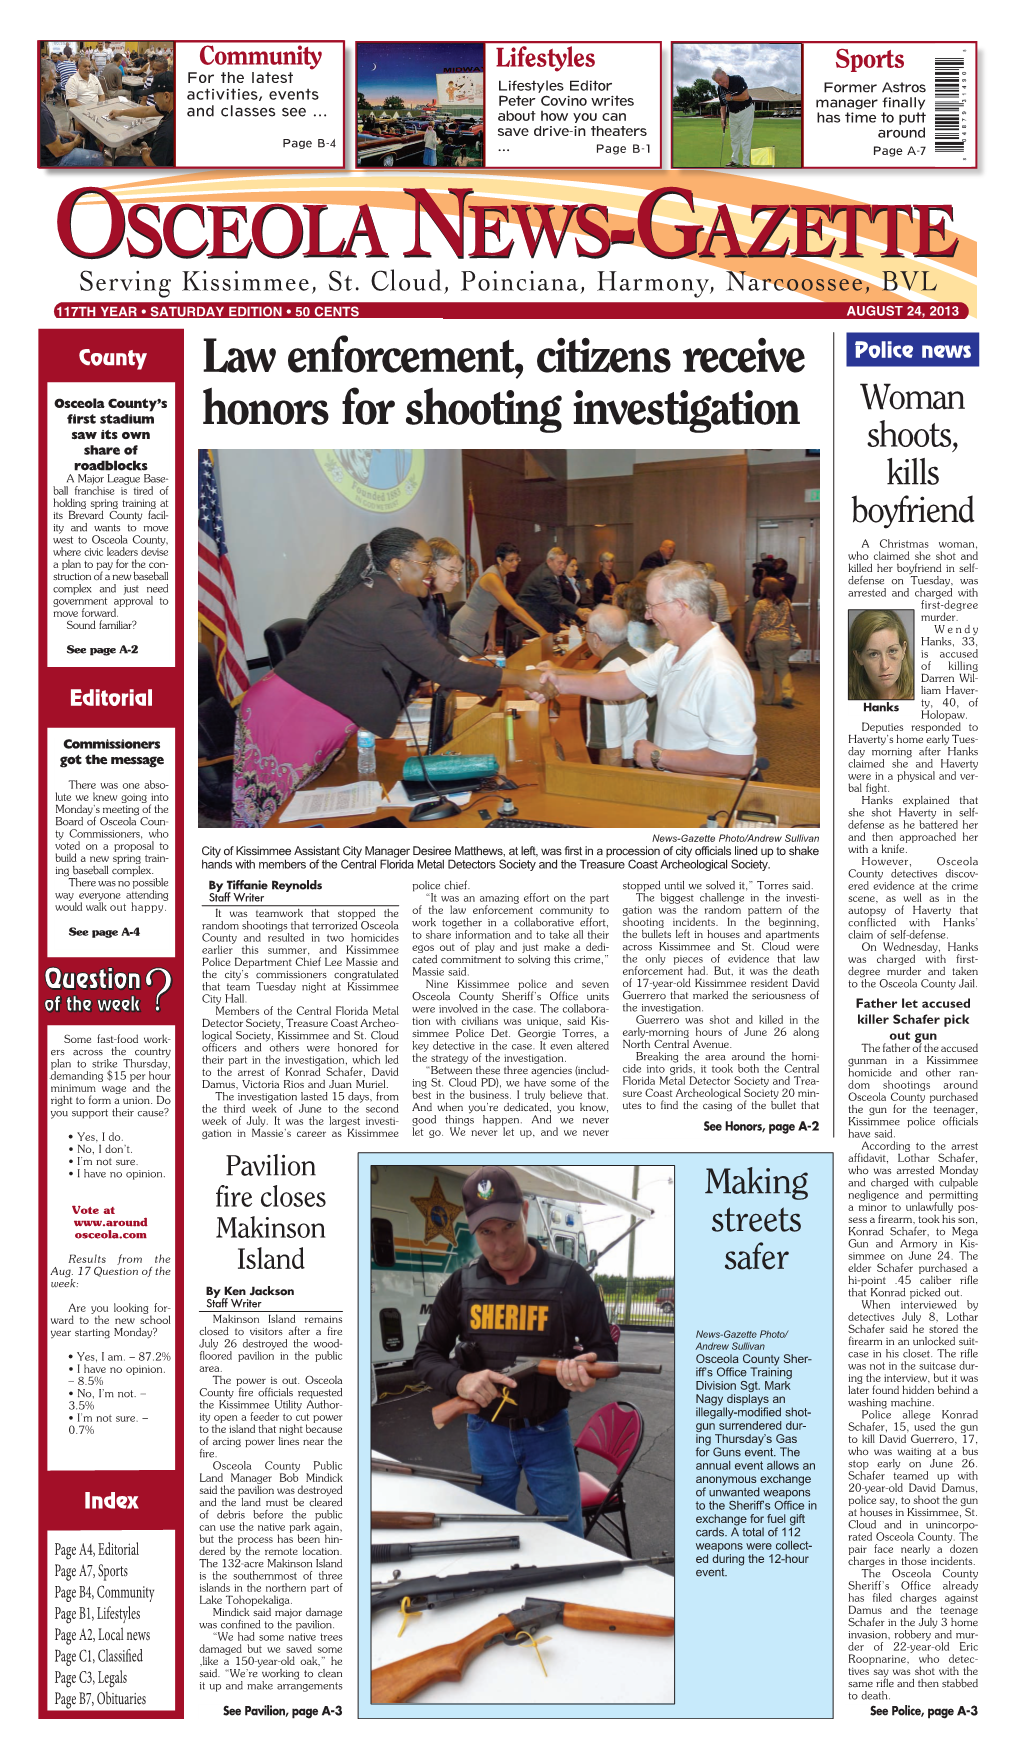 Law Enforcement, Citizens Receive Honors for Shooting Investigation